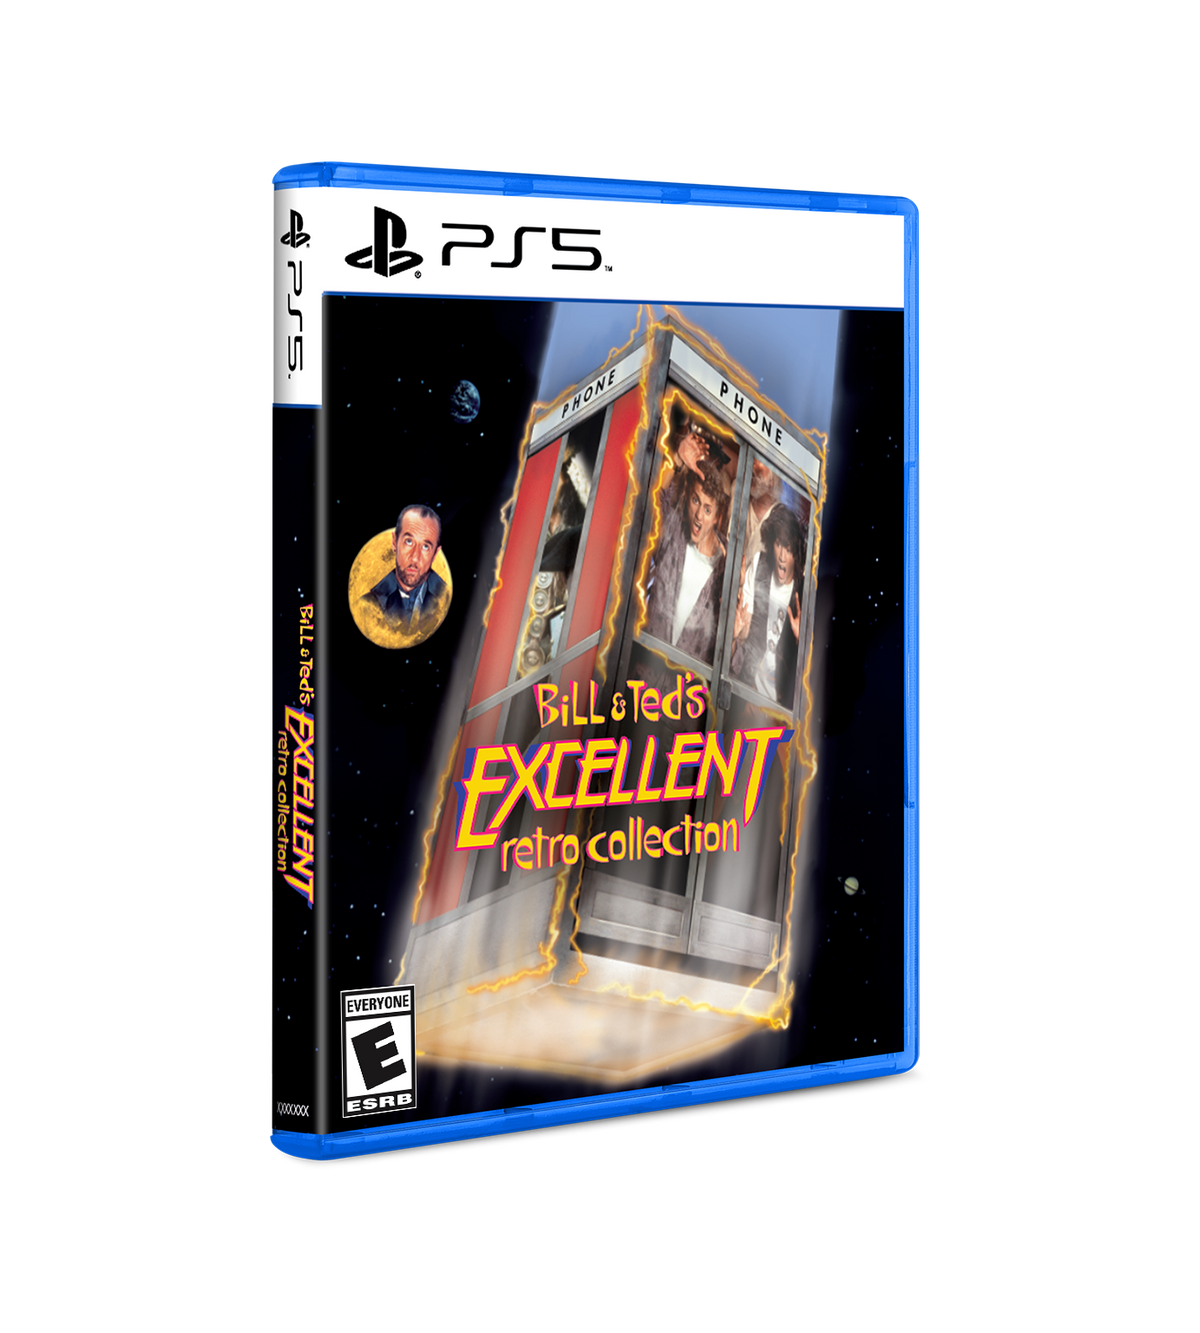 PS5 Limited Run #25: Bill & Ted's Excellent Retro Collection